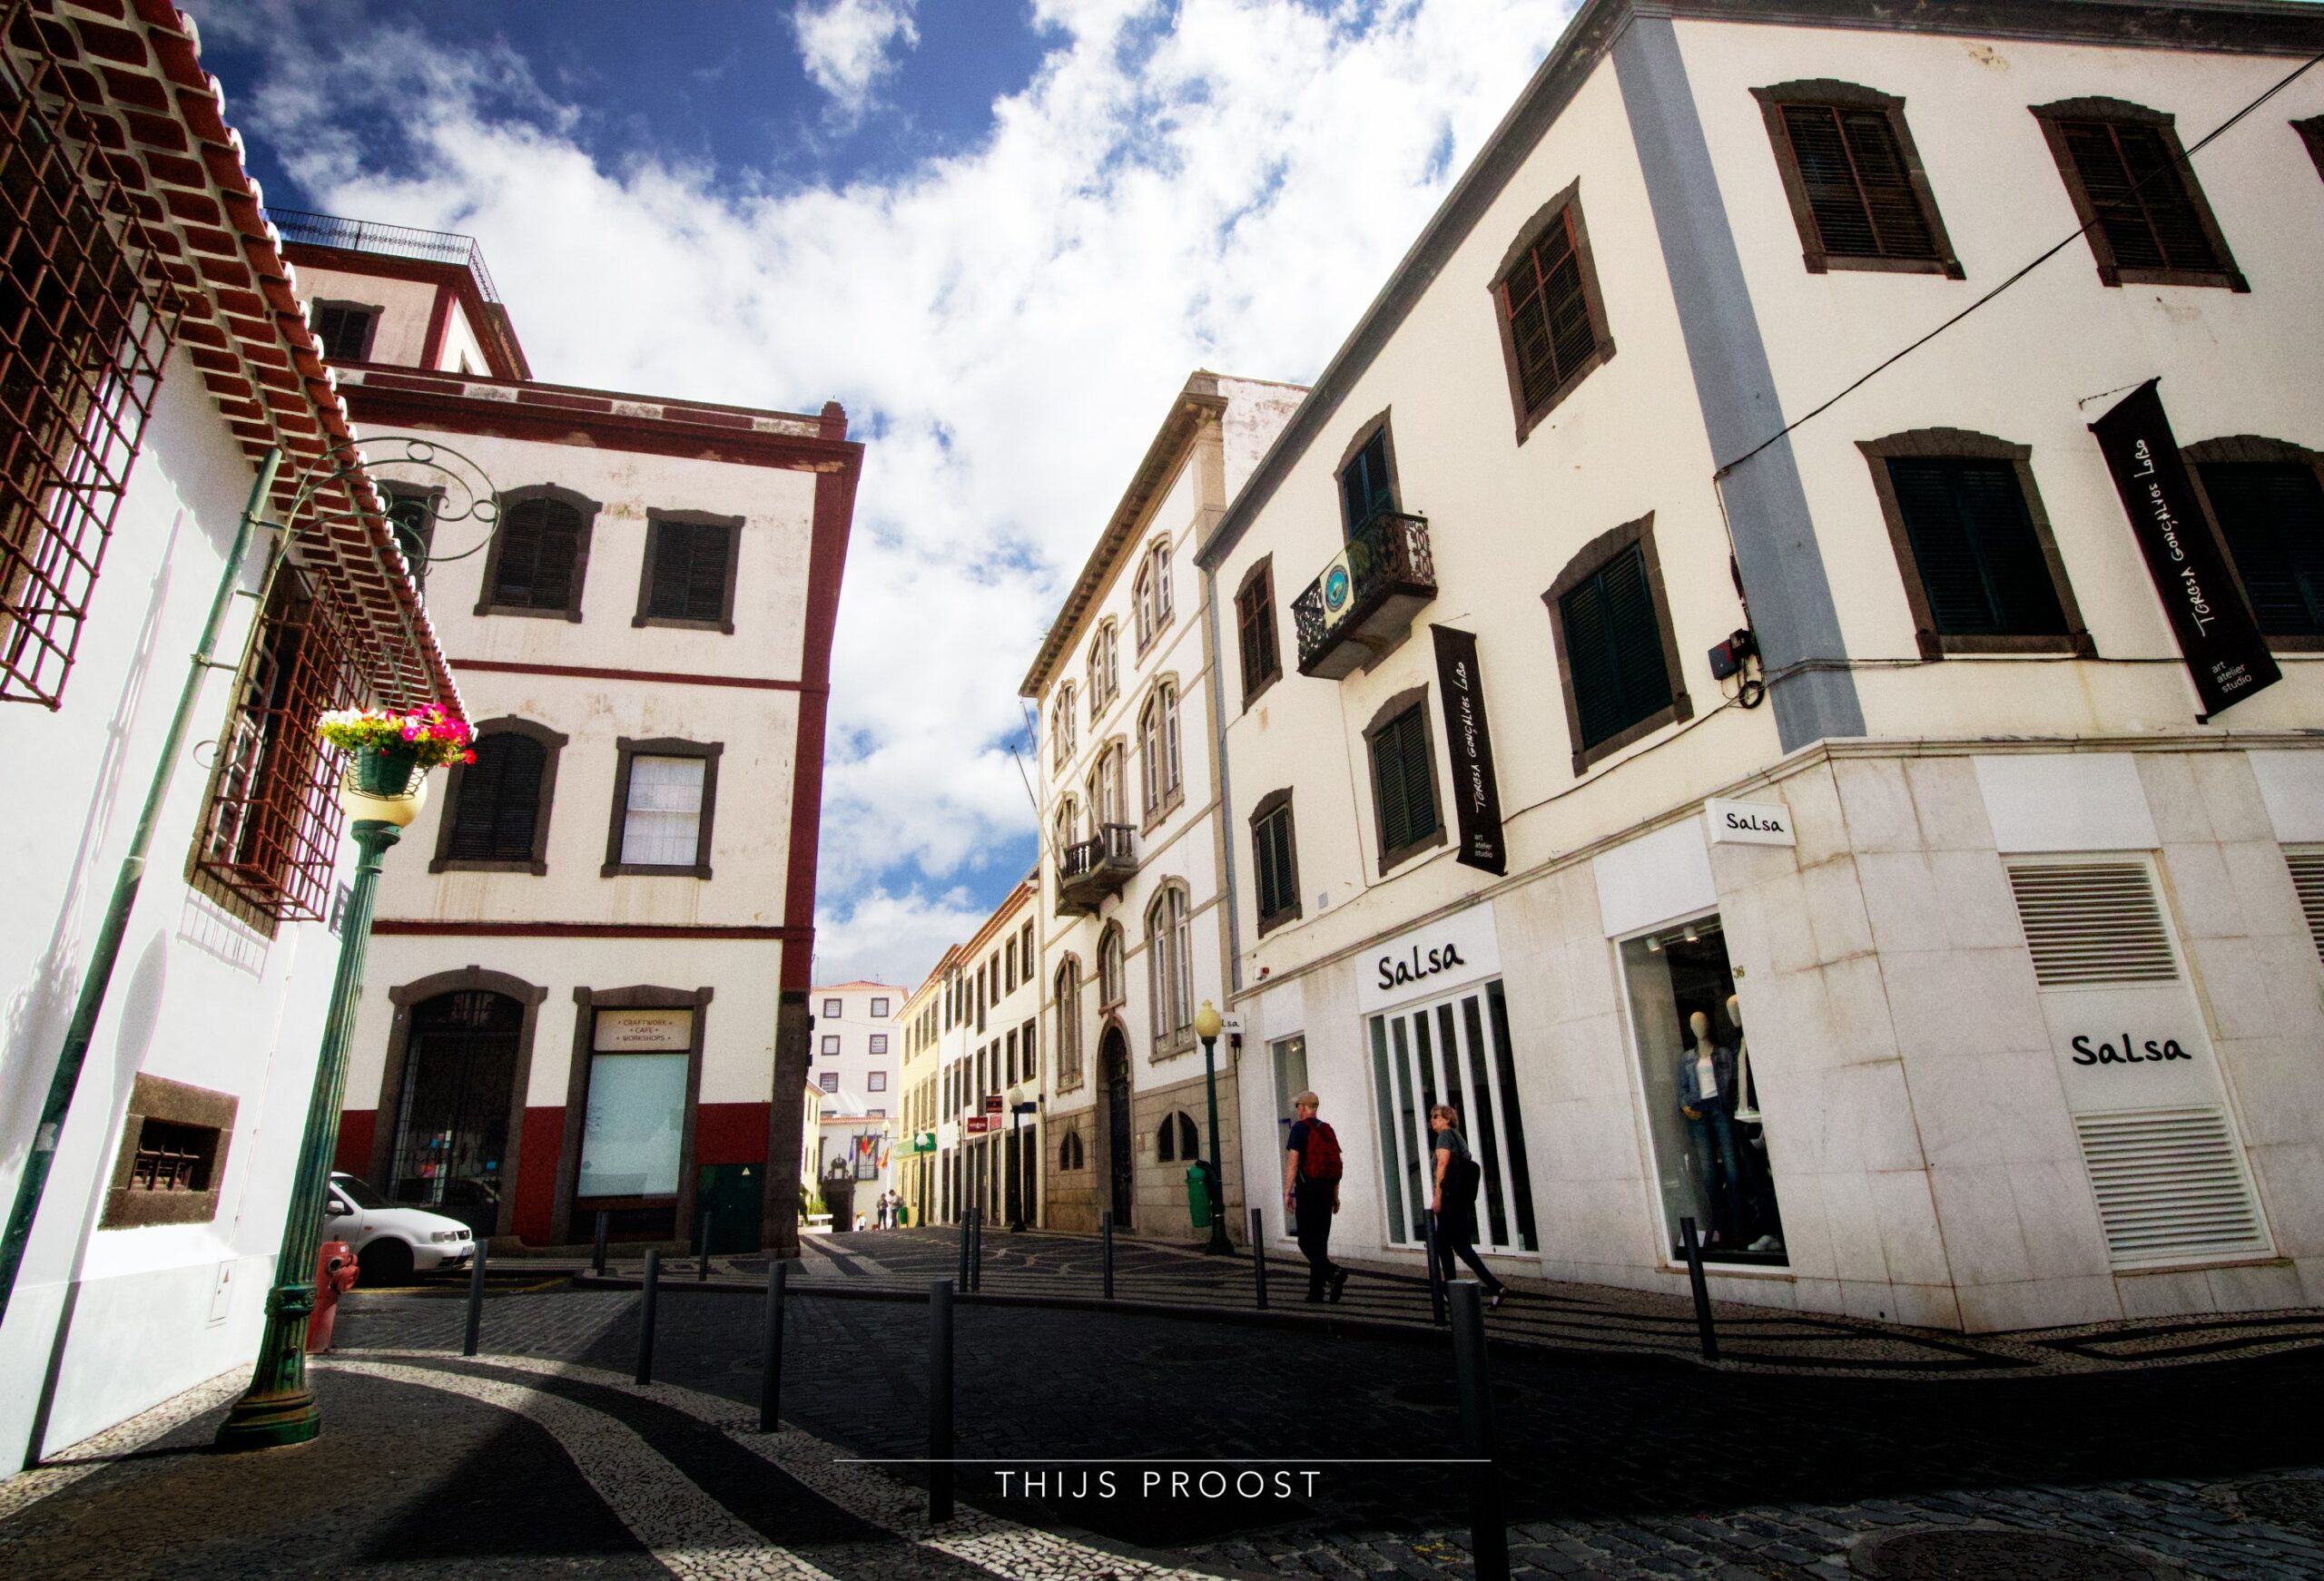 A wide angel picture of some buildings in the center of Funchal Madeira. Withe clouds with blue sky are in the center of the image.